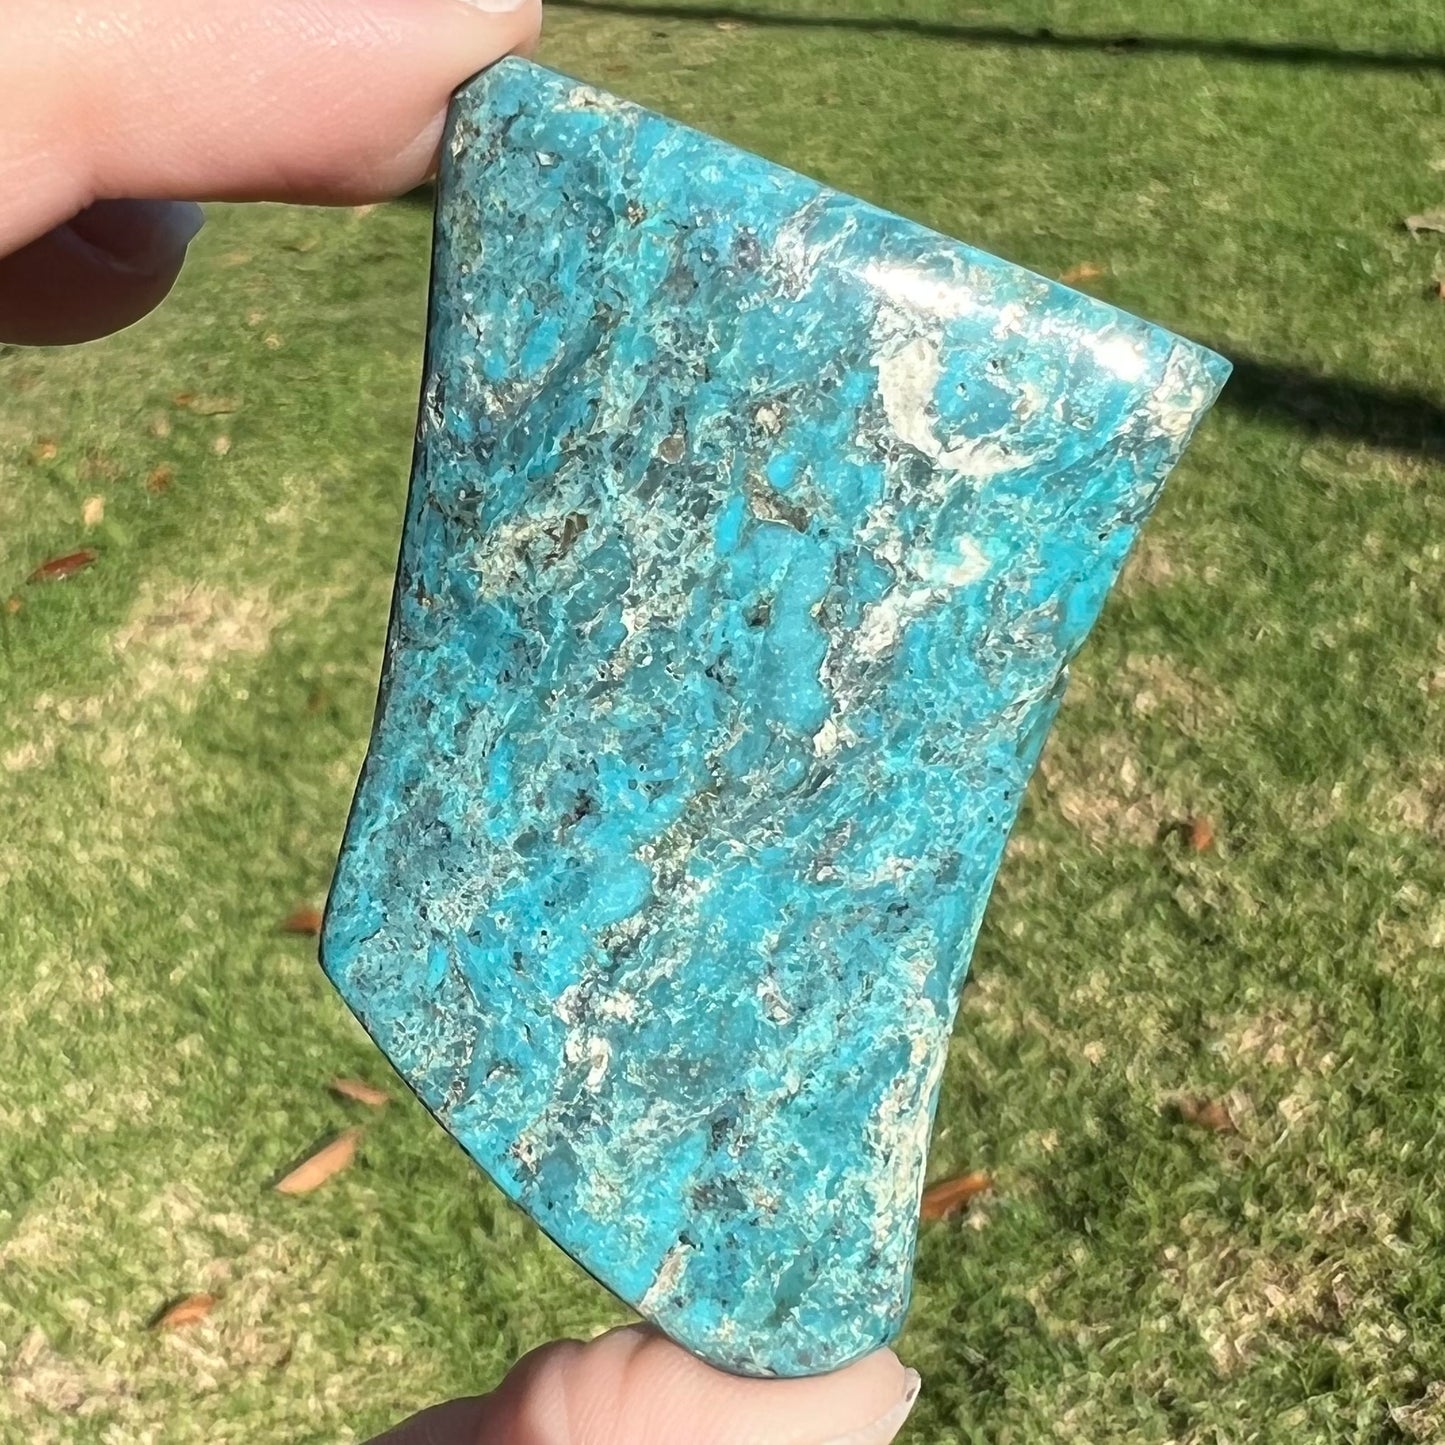 One loose semi-polished Stormy Mountain turquoise stone.